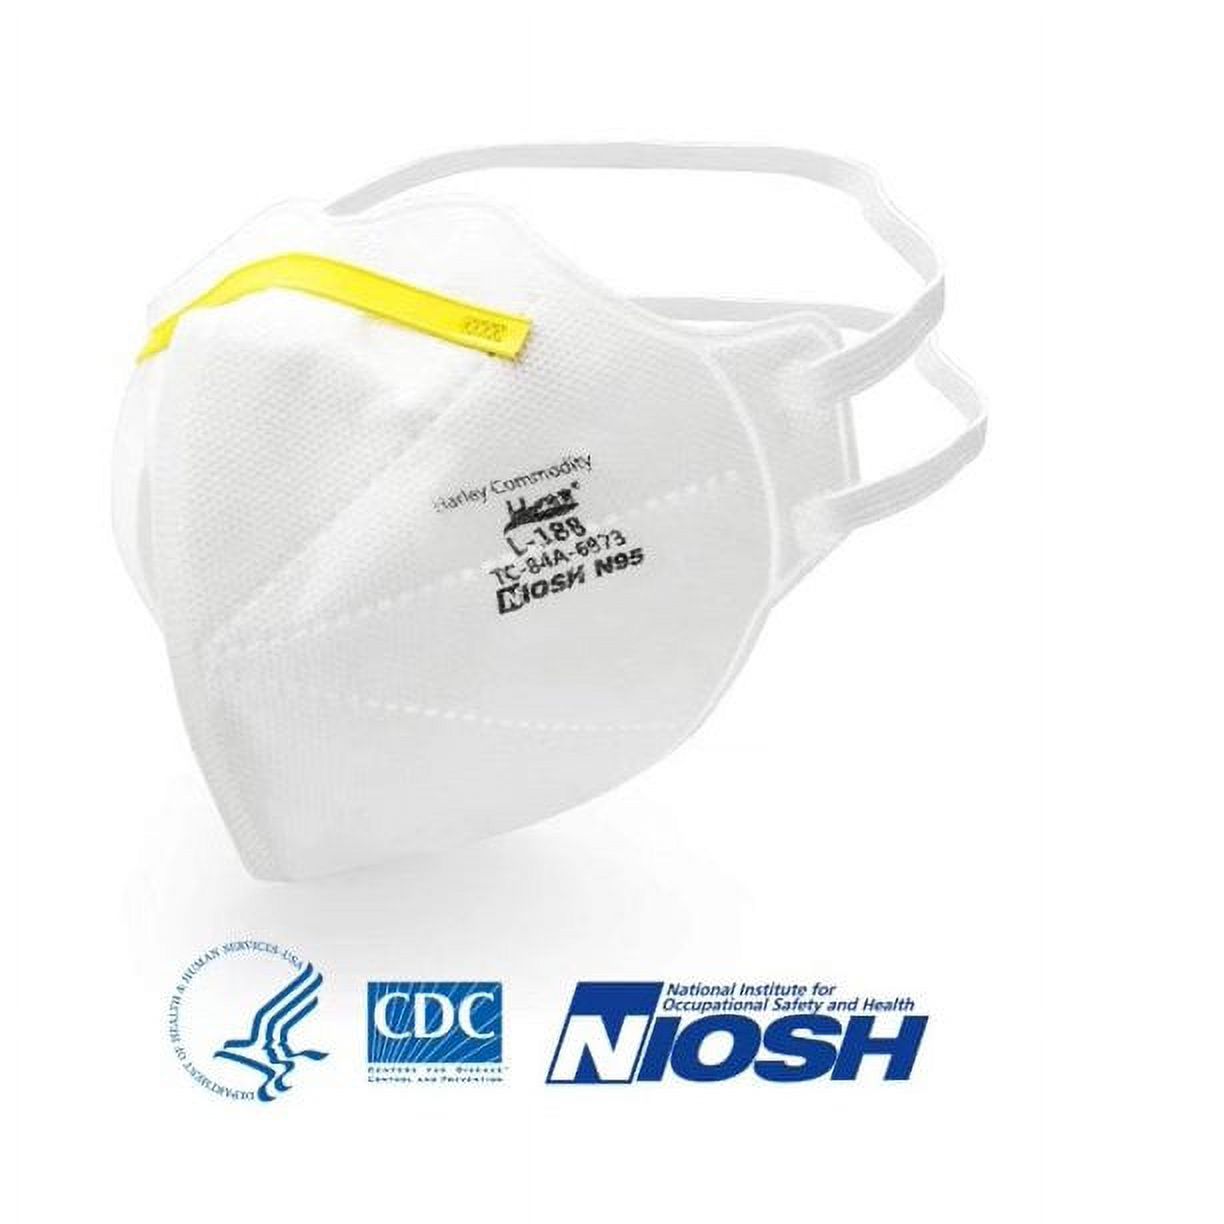 Harley Commodity l-188 N95 Respirator Face Mask-Model L-188-NIOSH Approved-20 per Box. Latex-free. More than 95% Filtration with Two Horizontal Straps Behind the Head - image 2 of 2